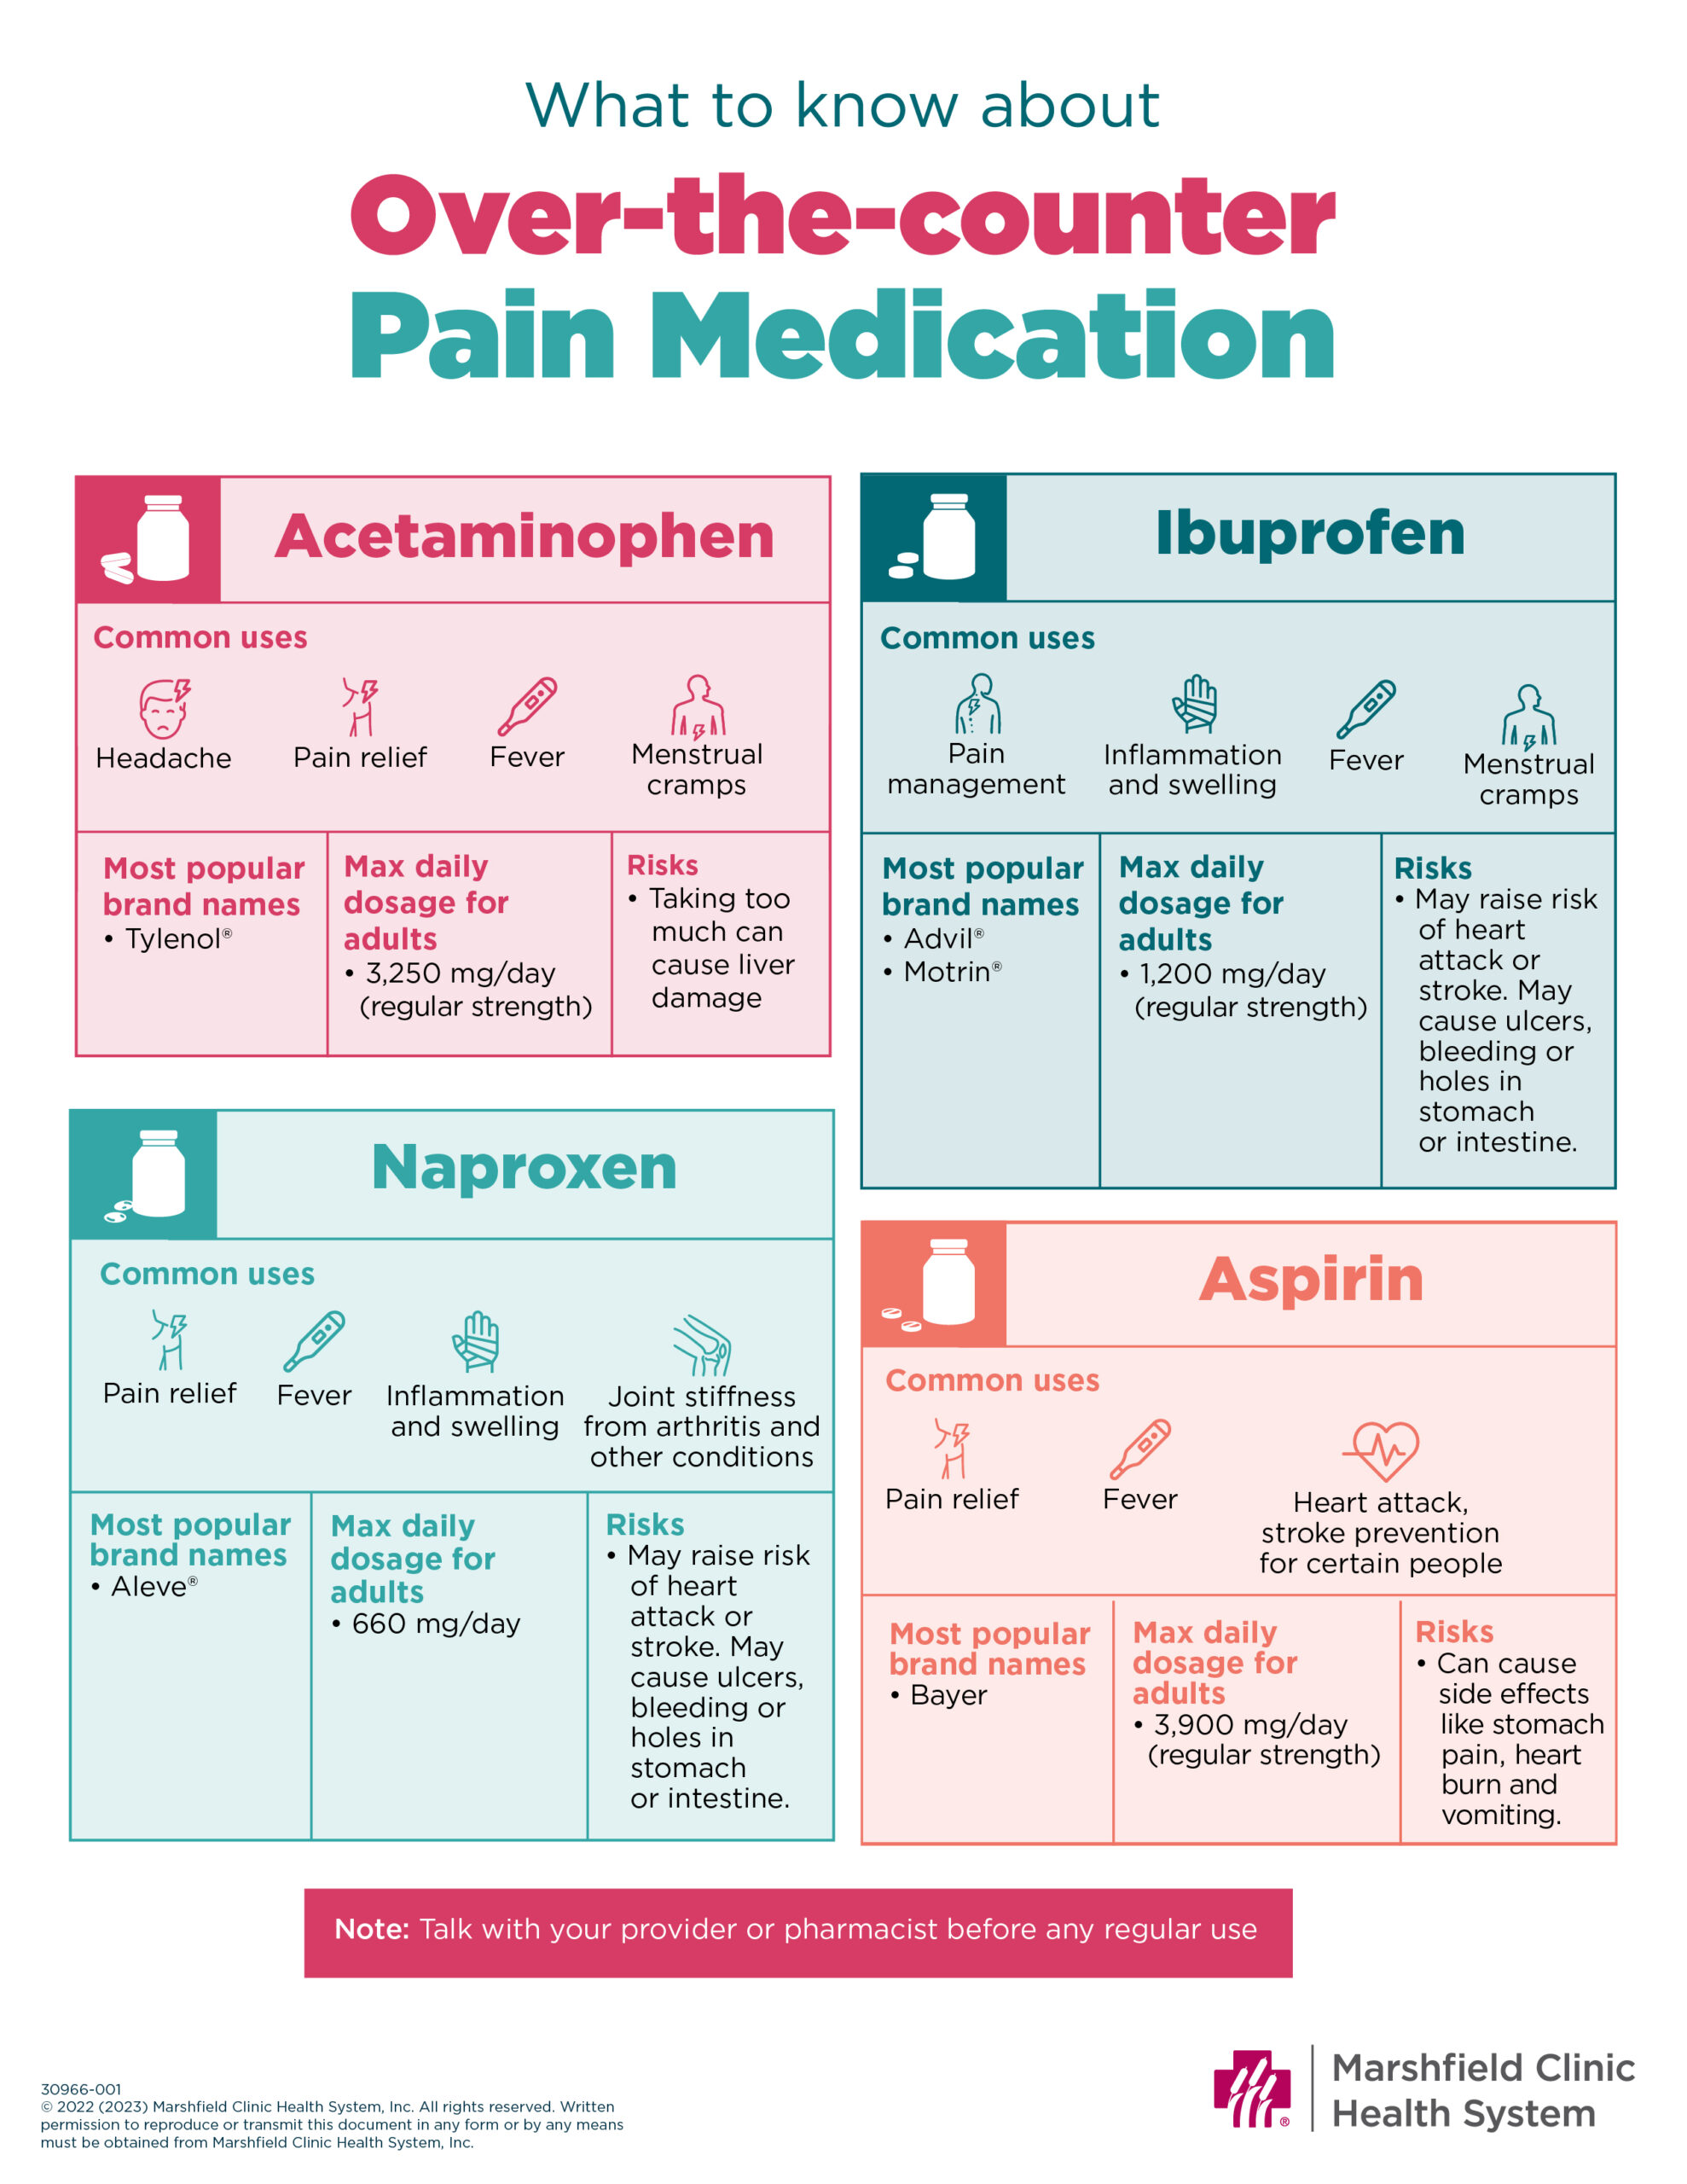 over-the-counter pain medications infographic